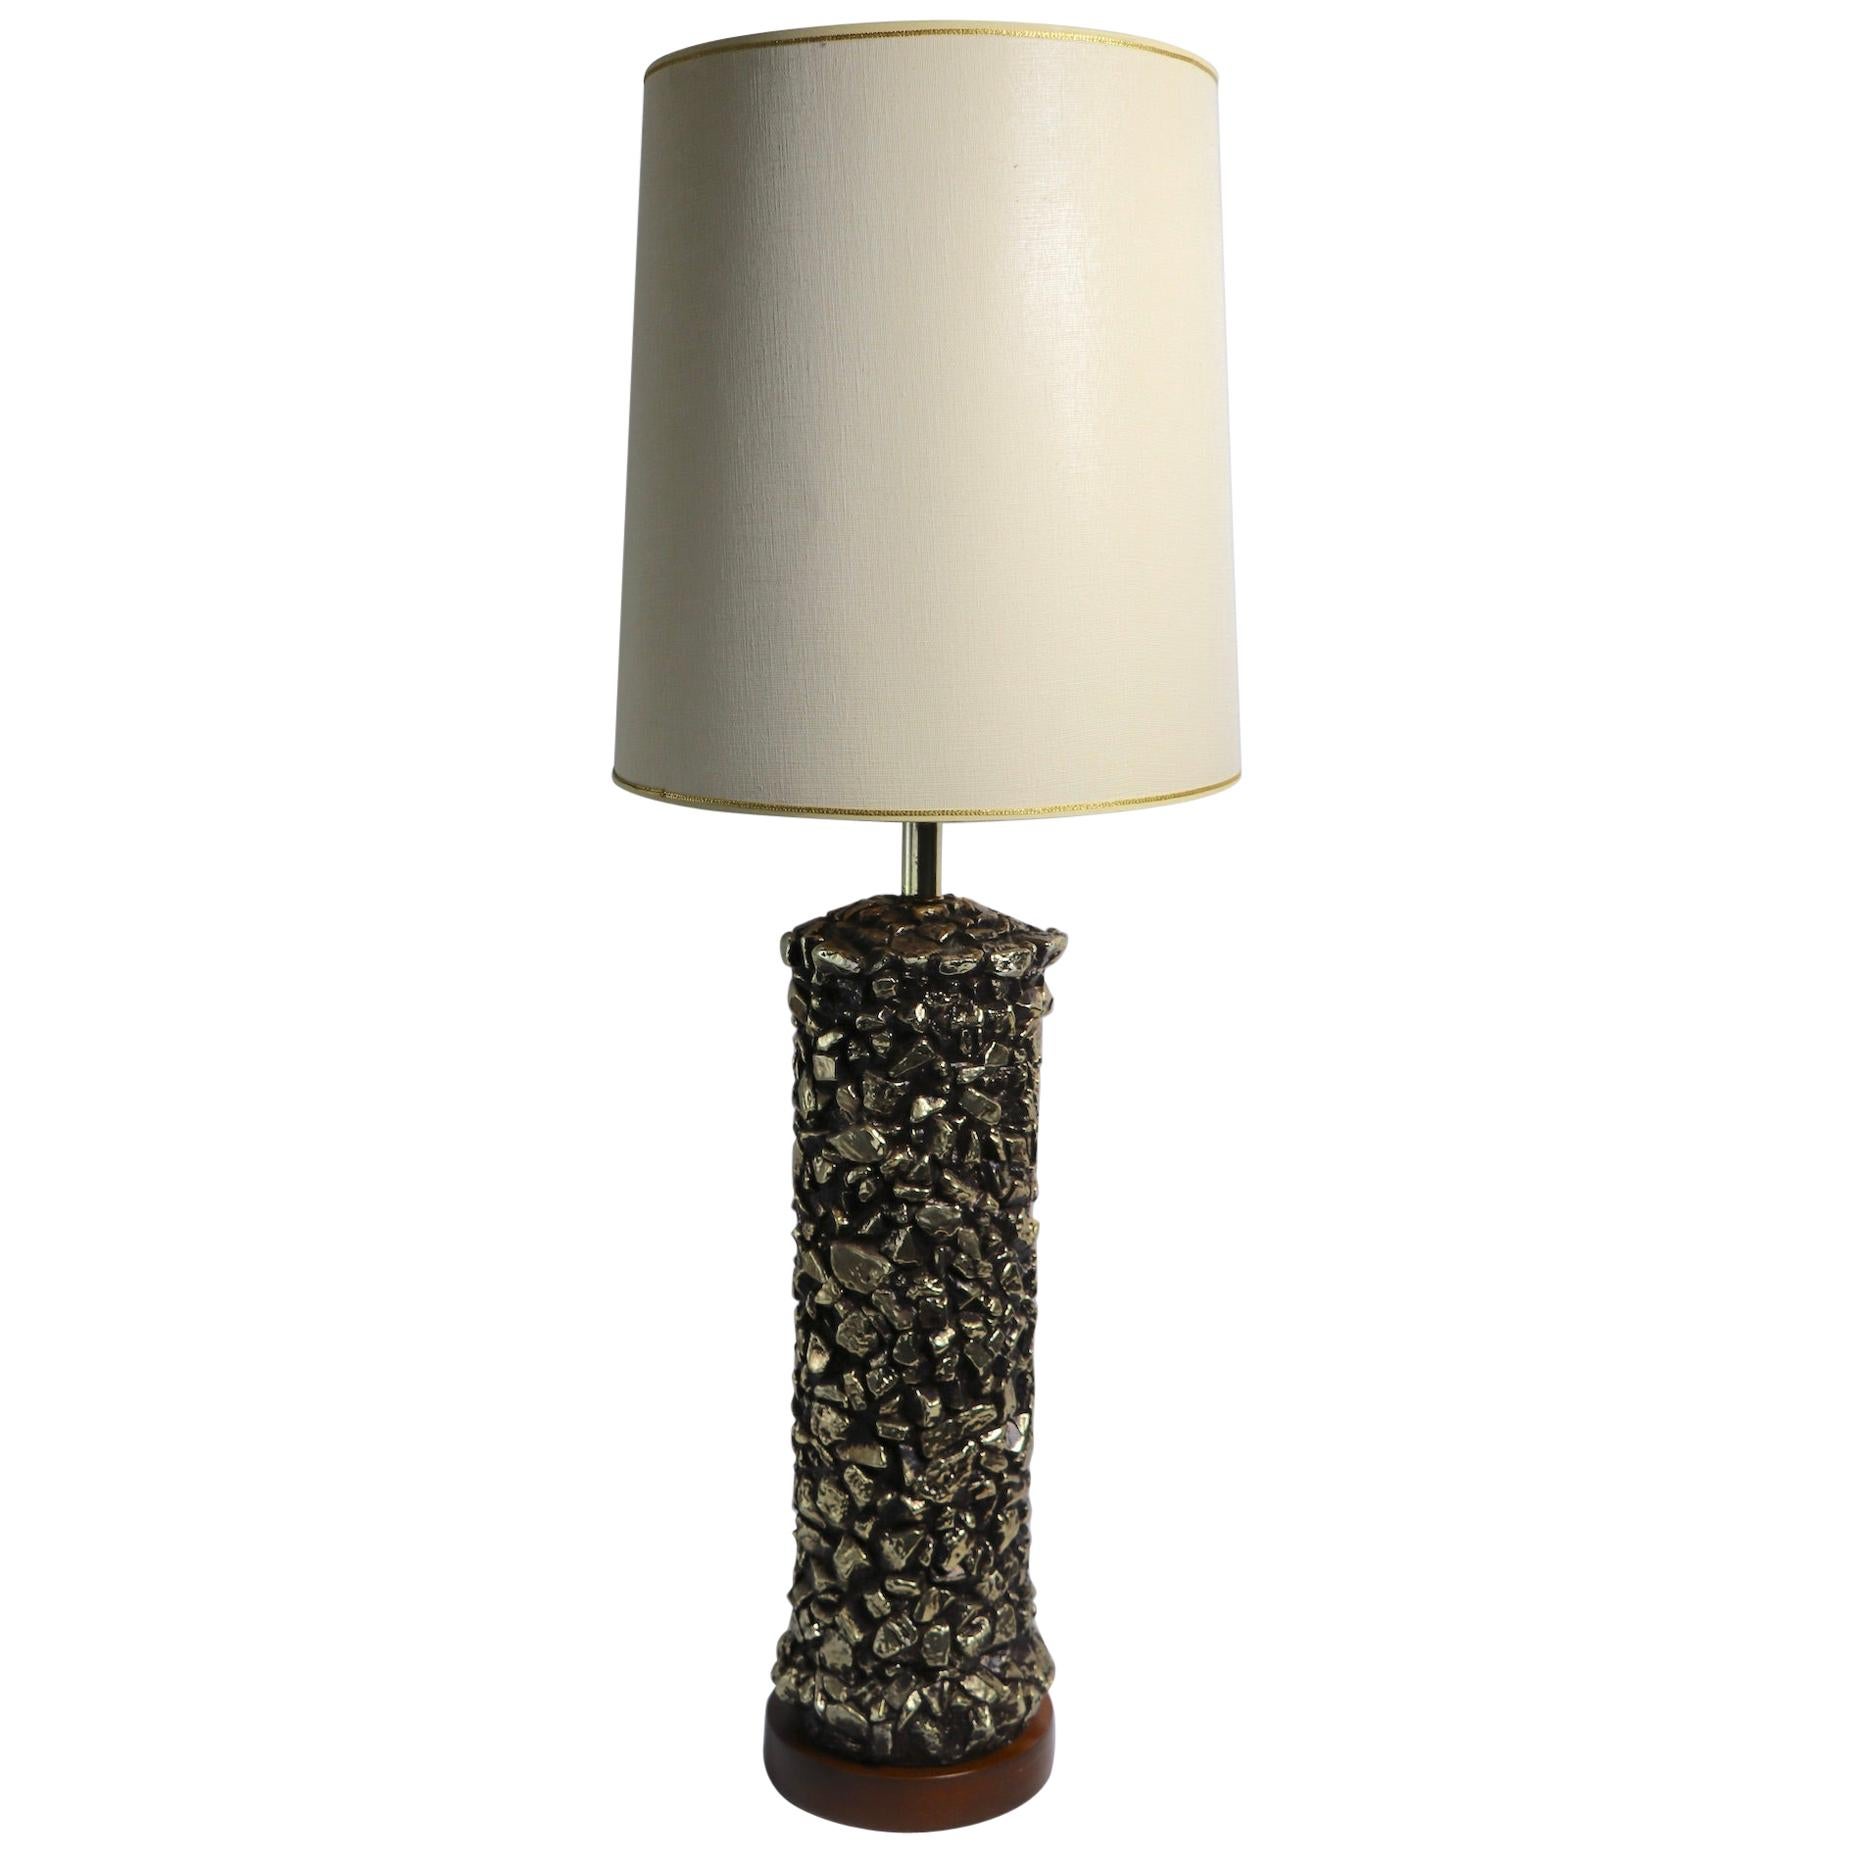 Ceramic Golden Nugget Table Lamp For Sale